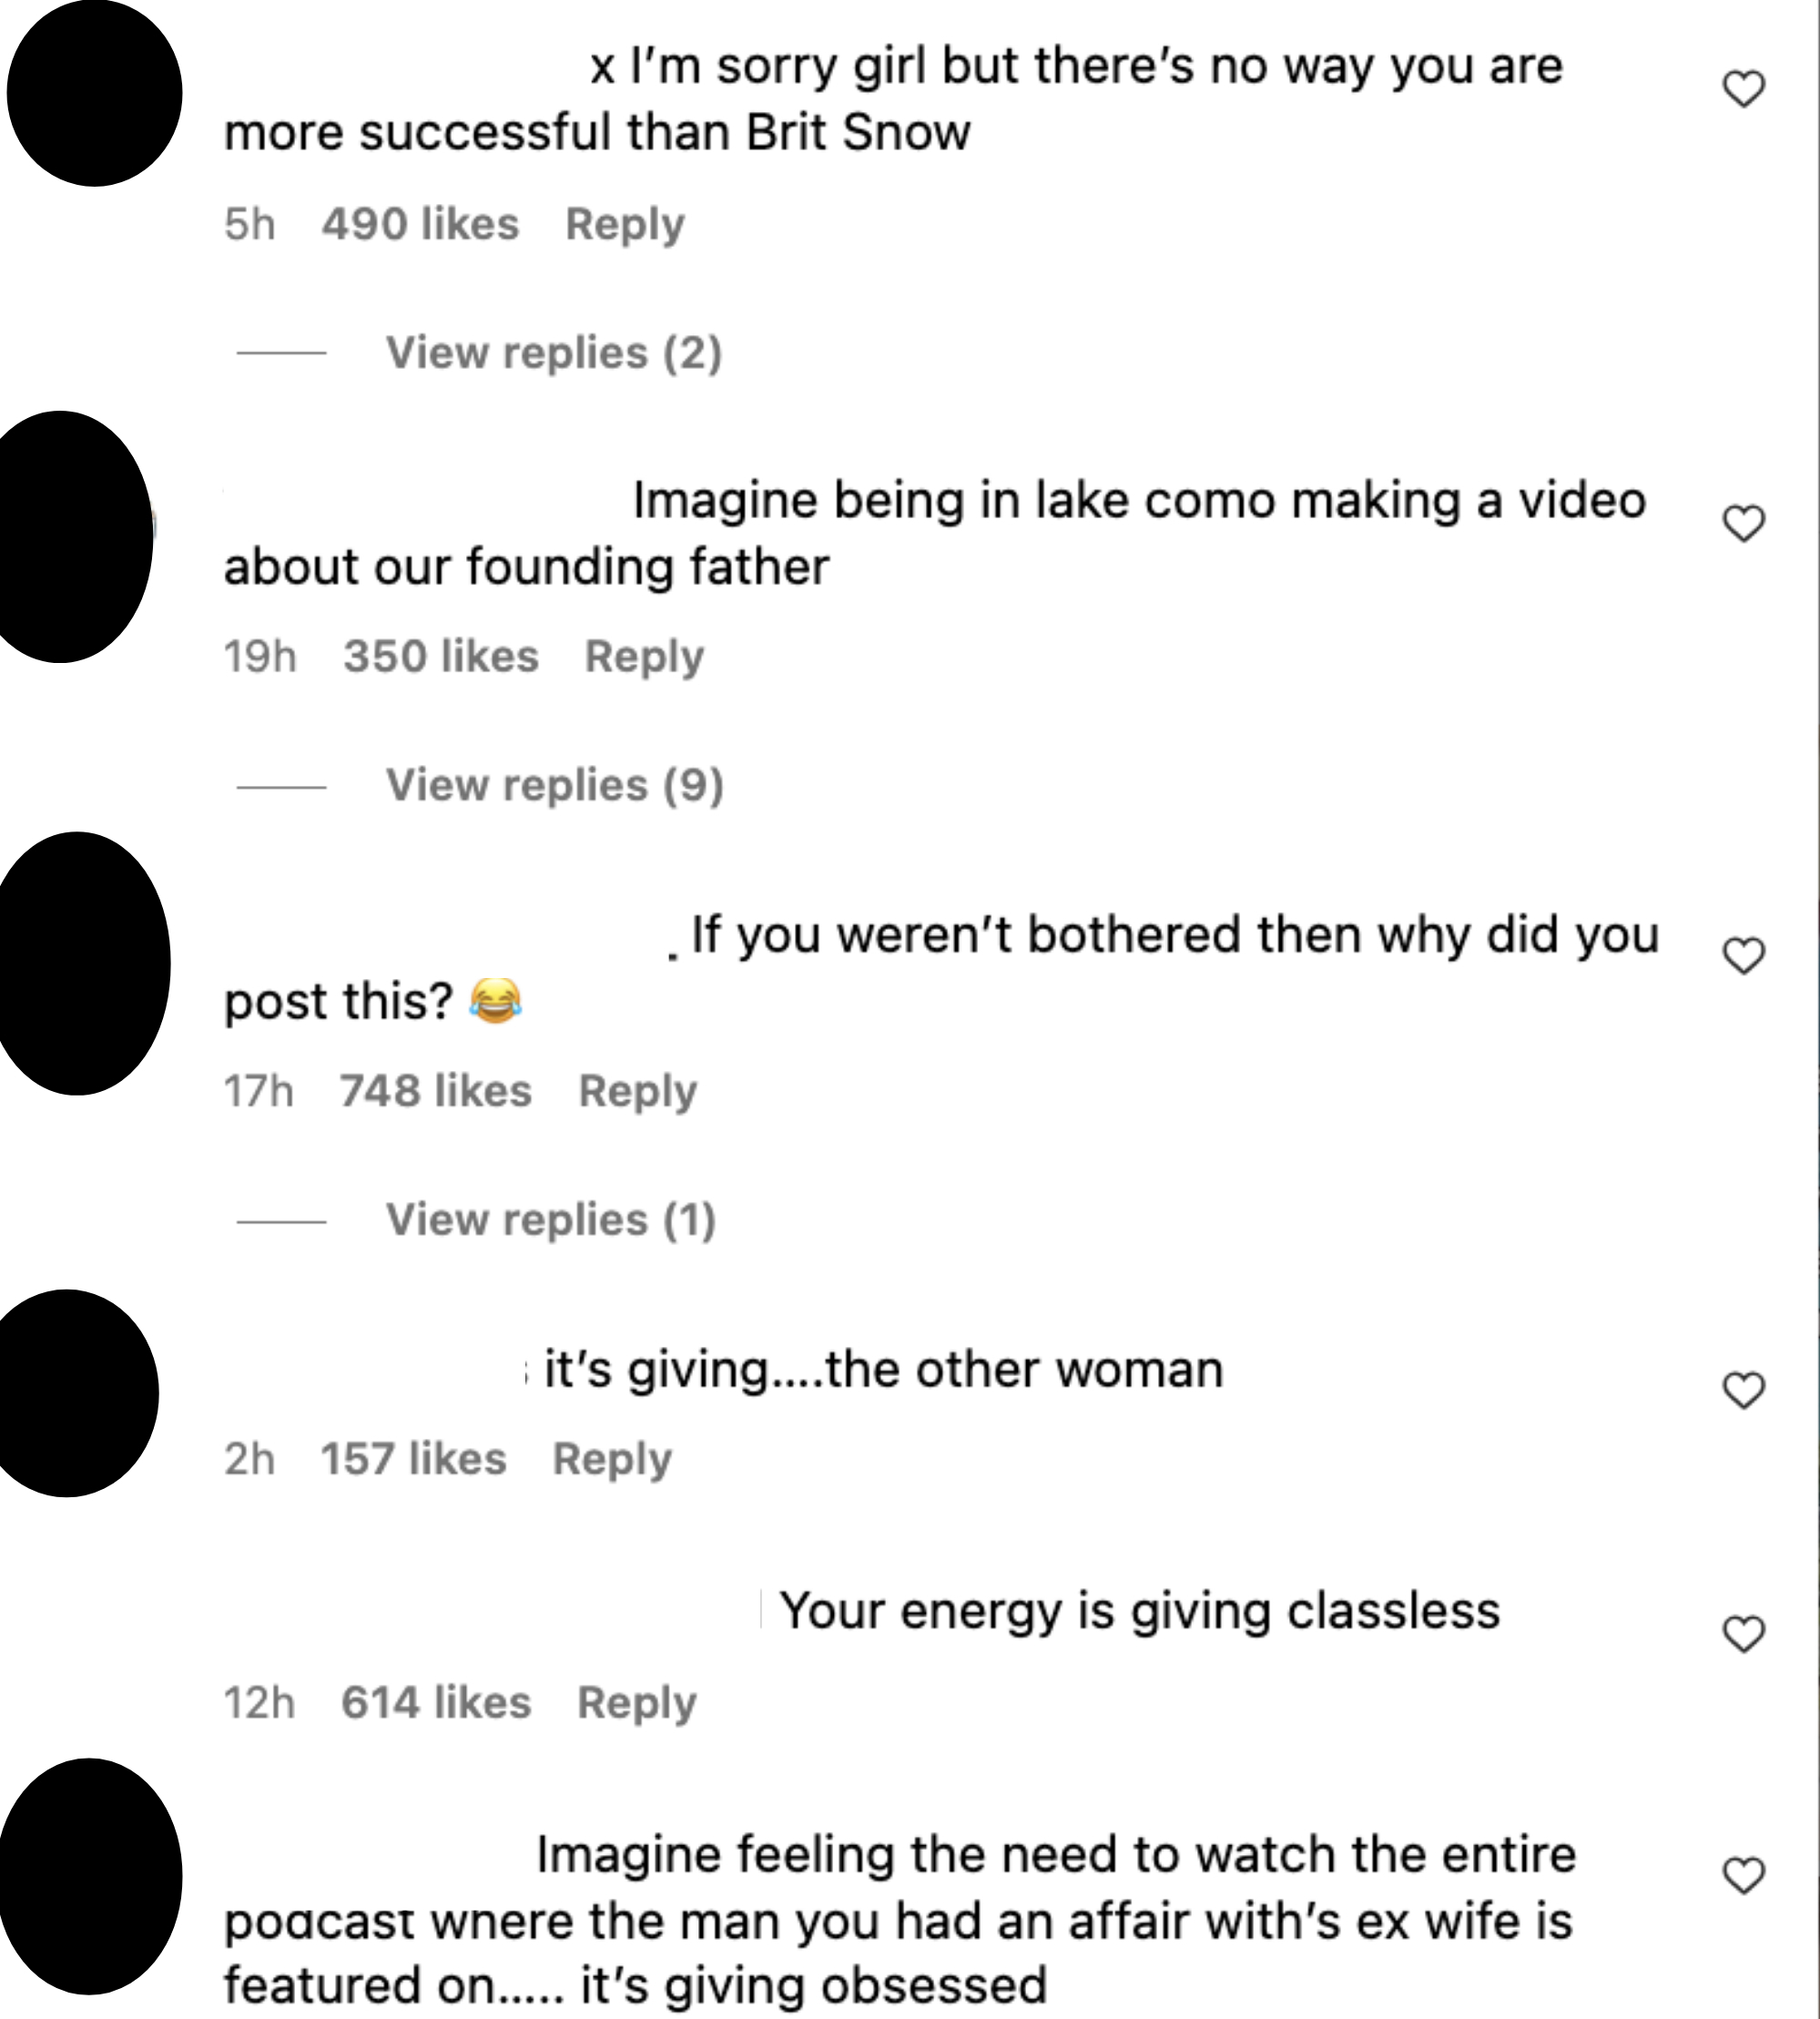 Multiple Instagram comments under a post, including &quot;Your energy is giving classless&quot; and &quot;If you weren&#x27;t bothered then why did you post this?&quot;